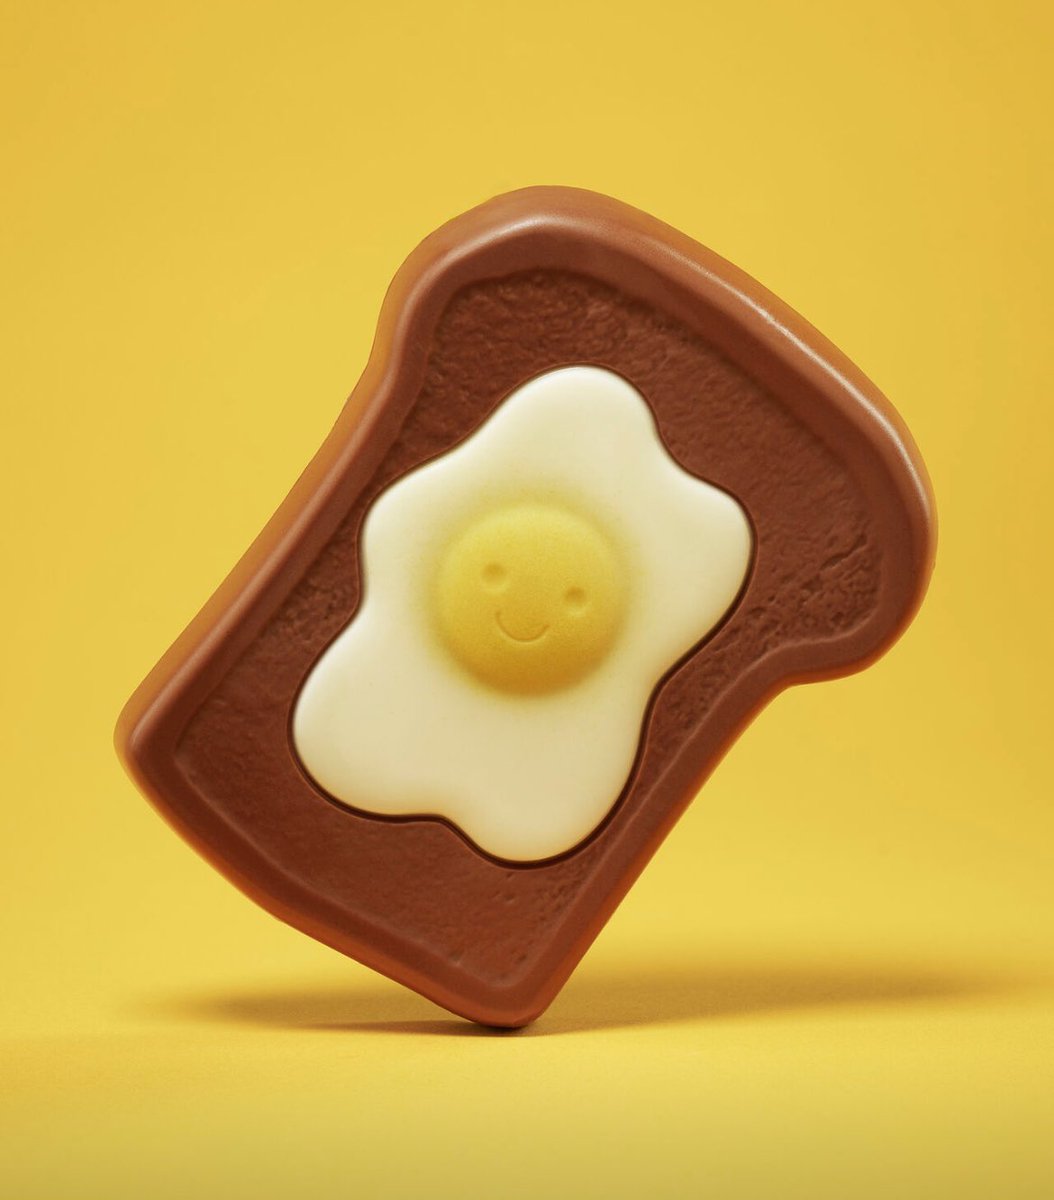 It’s #NationalToastDay so let me take this opportunity to introduce you to the award-winning 'Sam on Toast' who's leapt on to the shelves in @waitrose shops! He’s served on top of a solid Belgian milk chocolate slice with a creamy butterscotch flavour. linkedin.com/posts/willtorr…